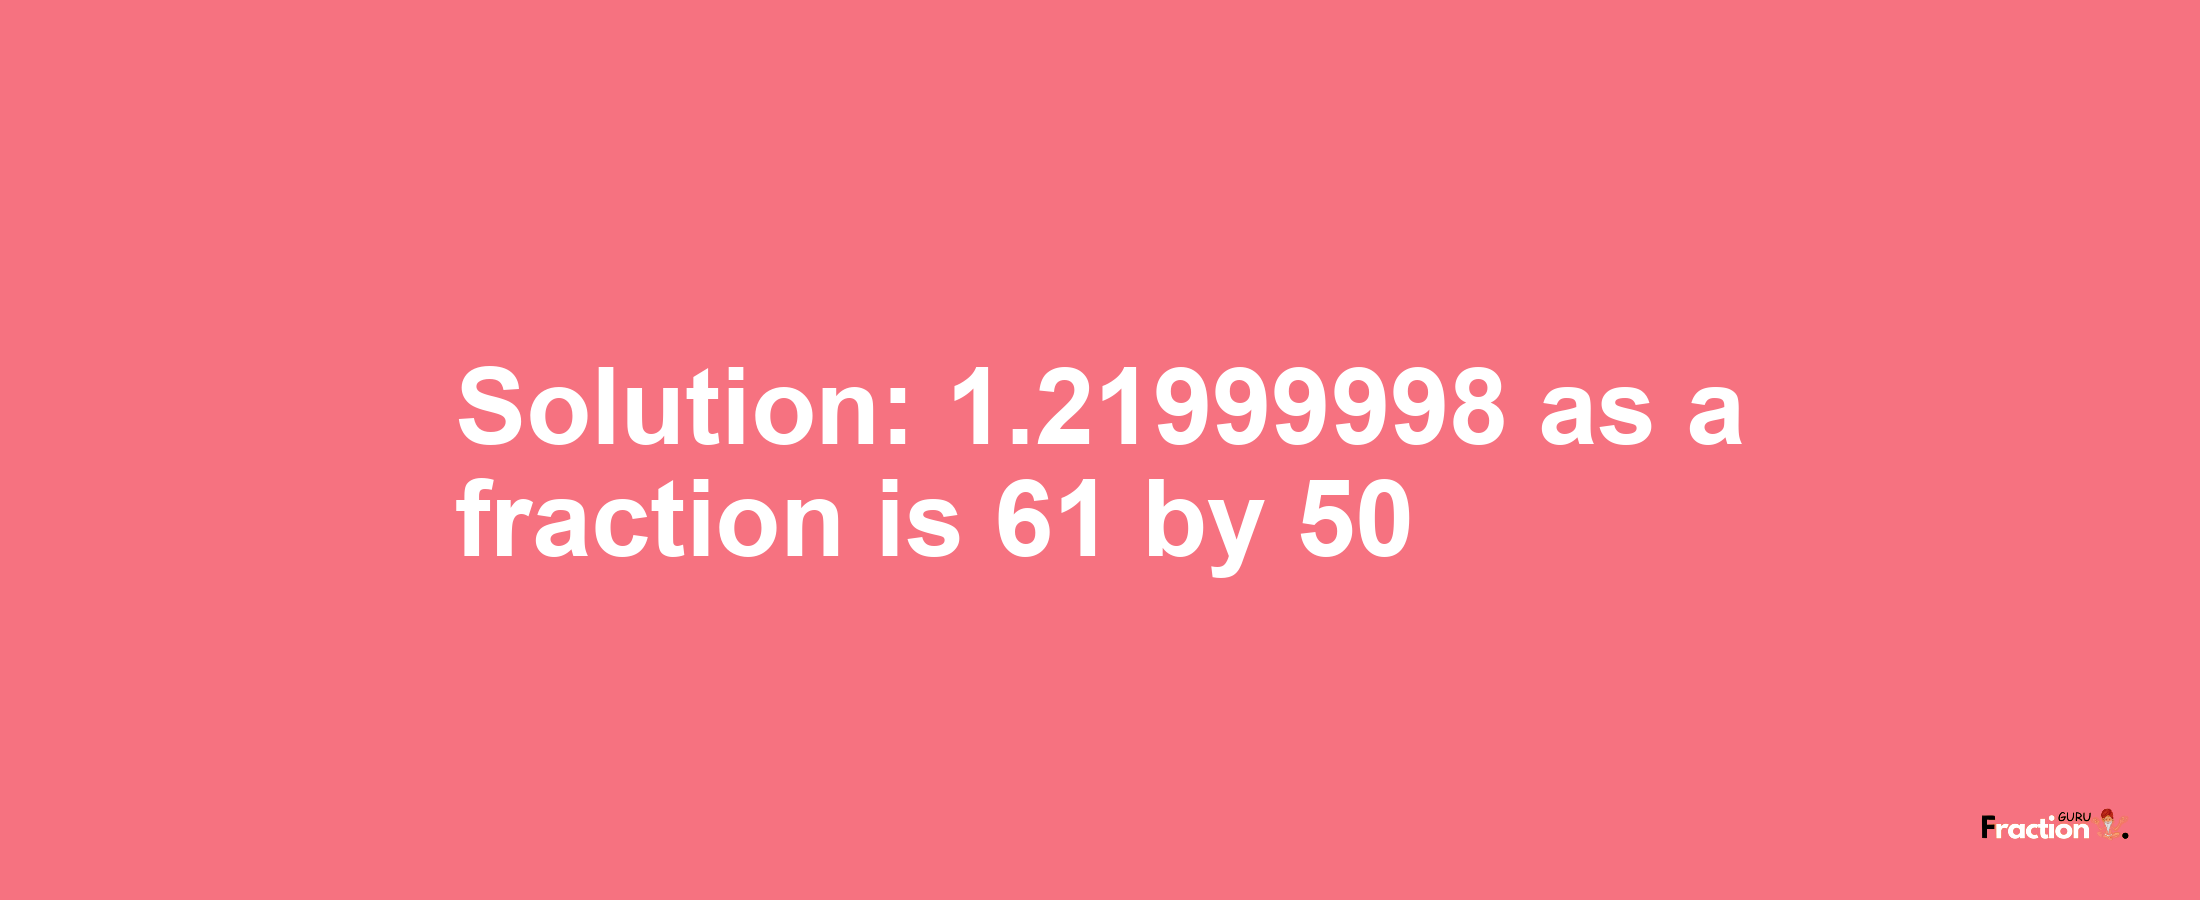 Solution:1.21999998 as a fraction is 61/50